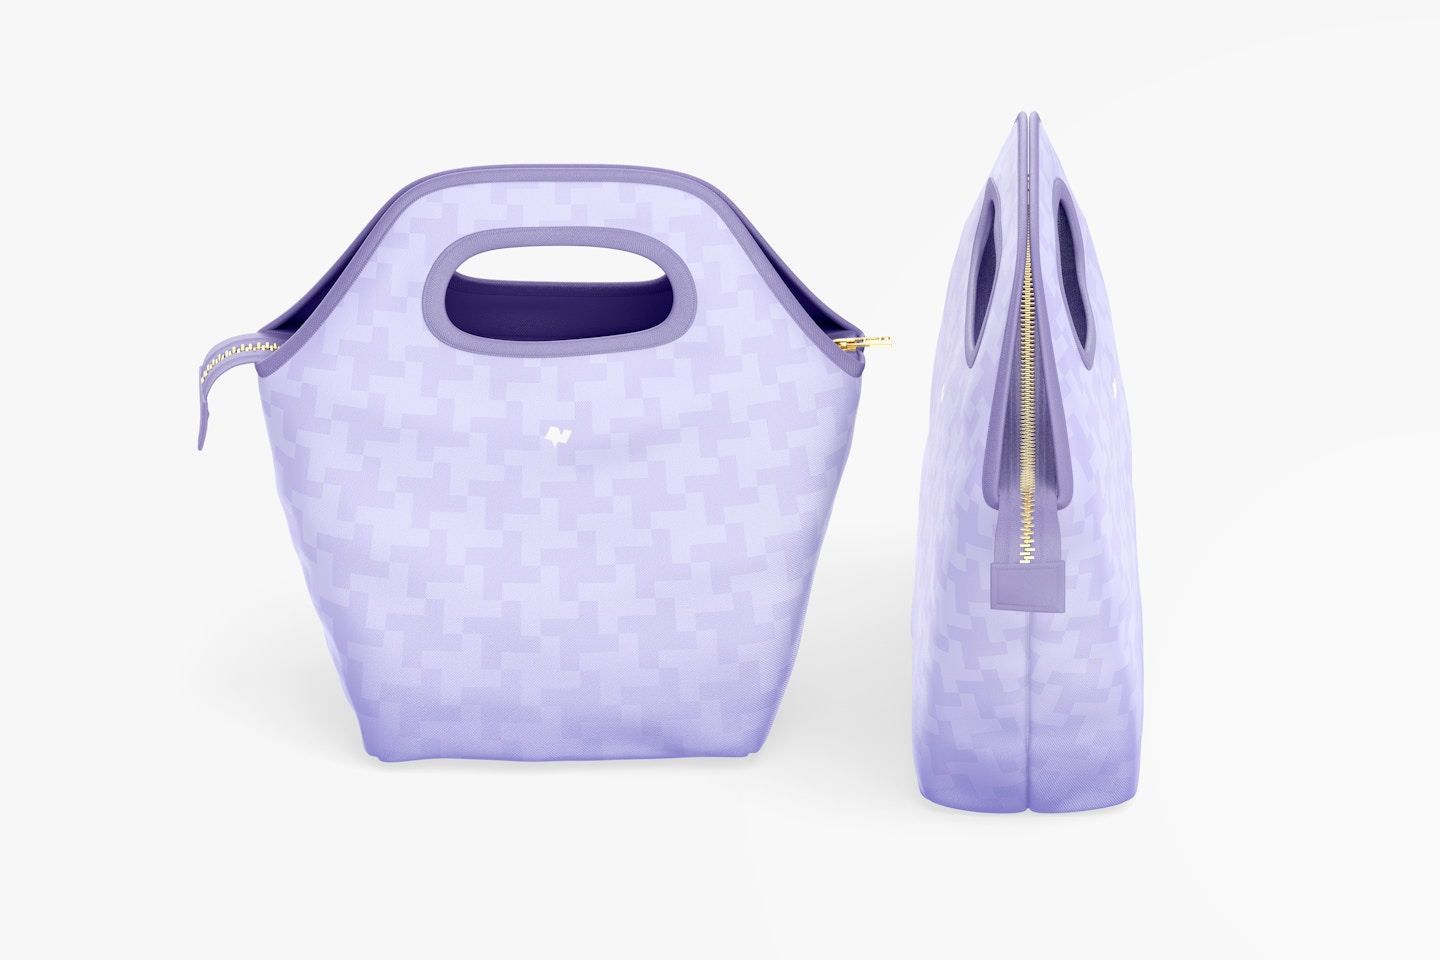 Lunch Bag Mockup, Isometric View